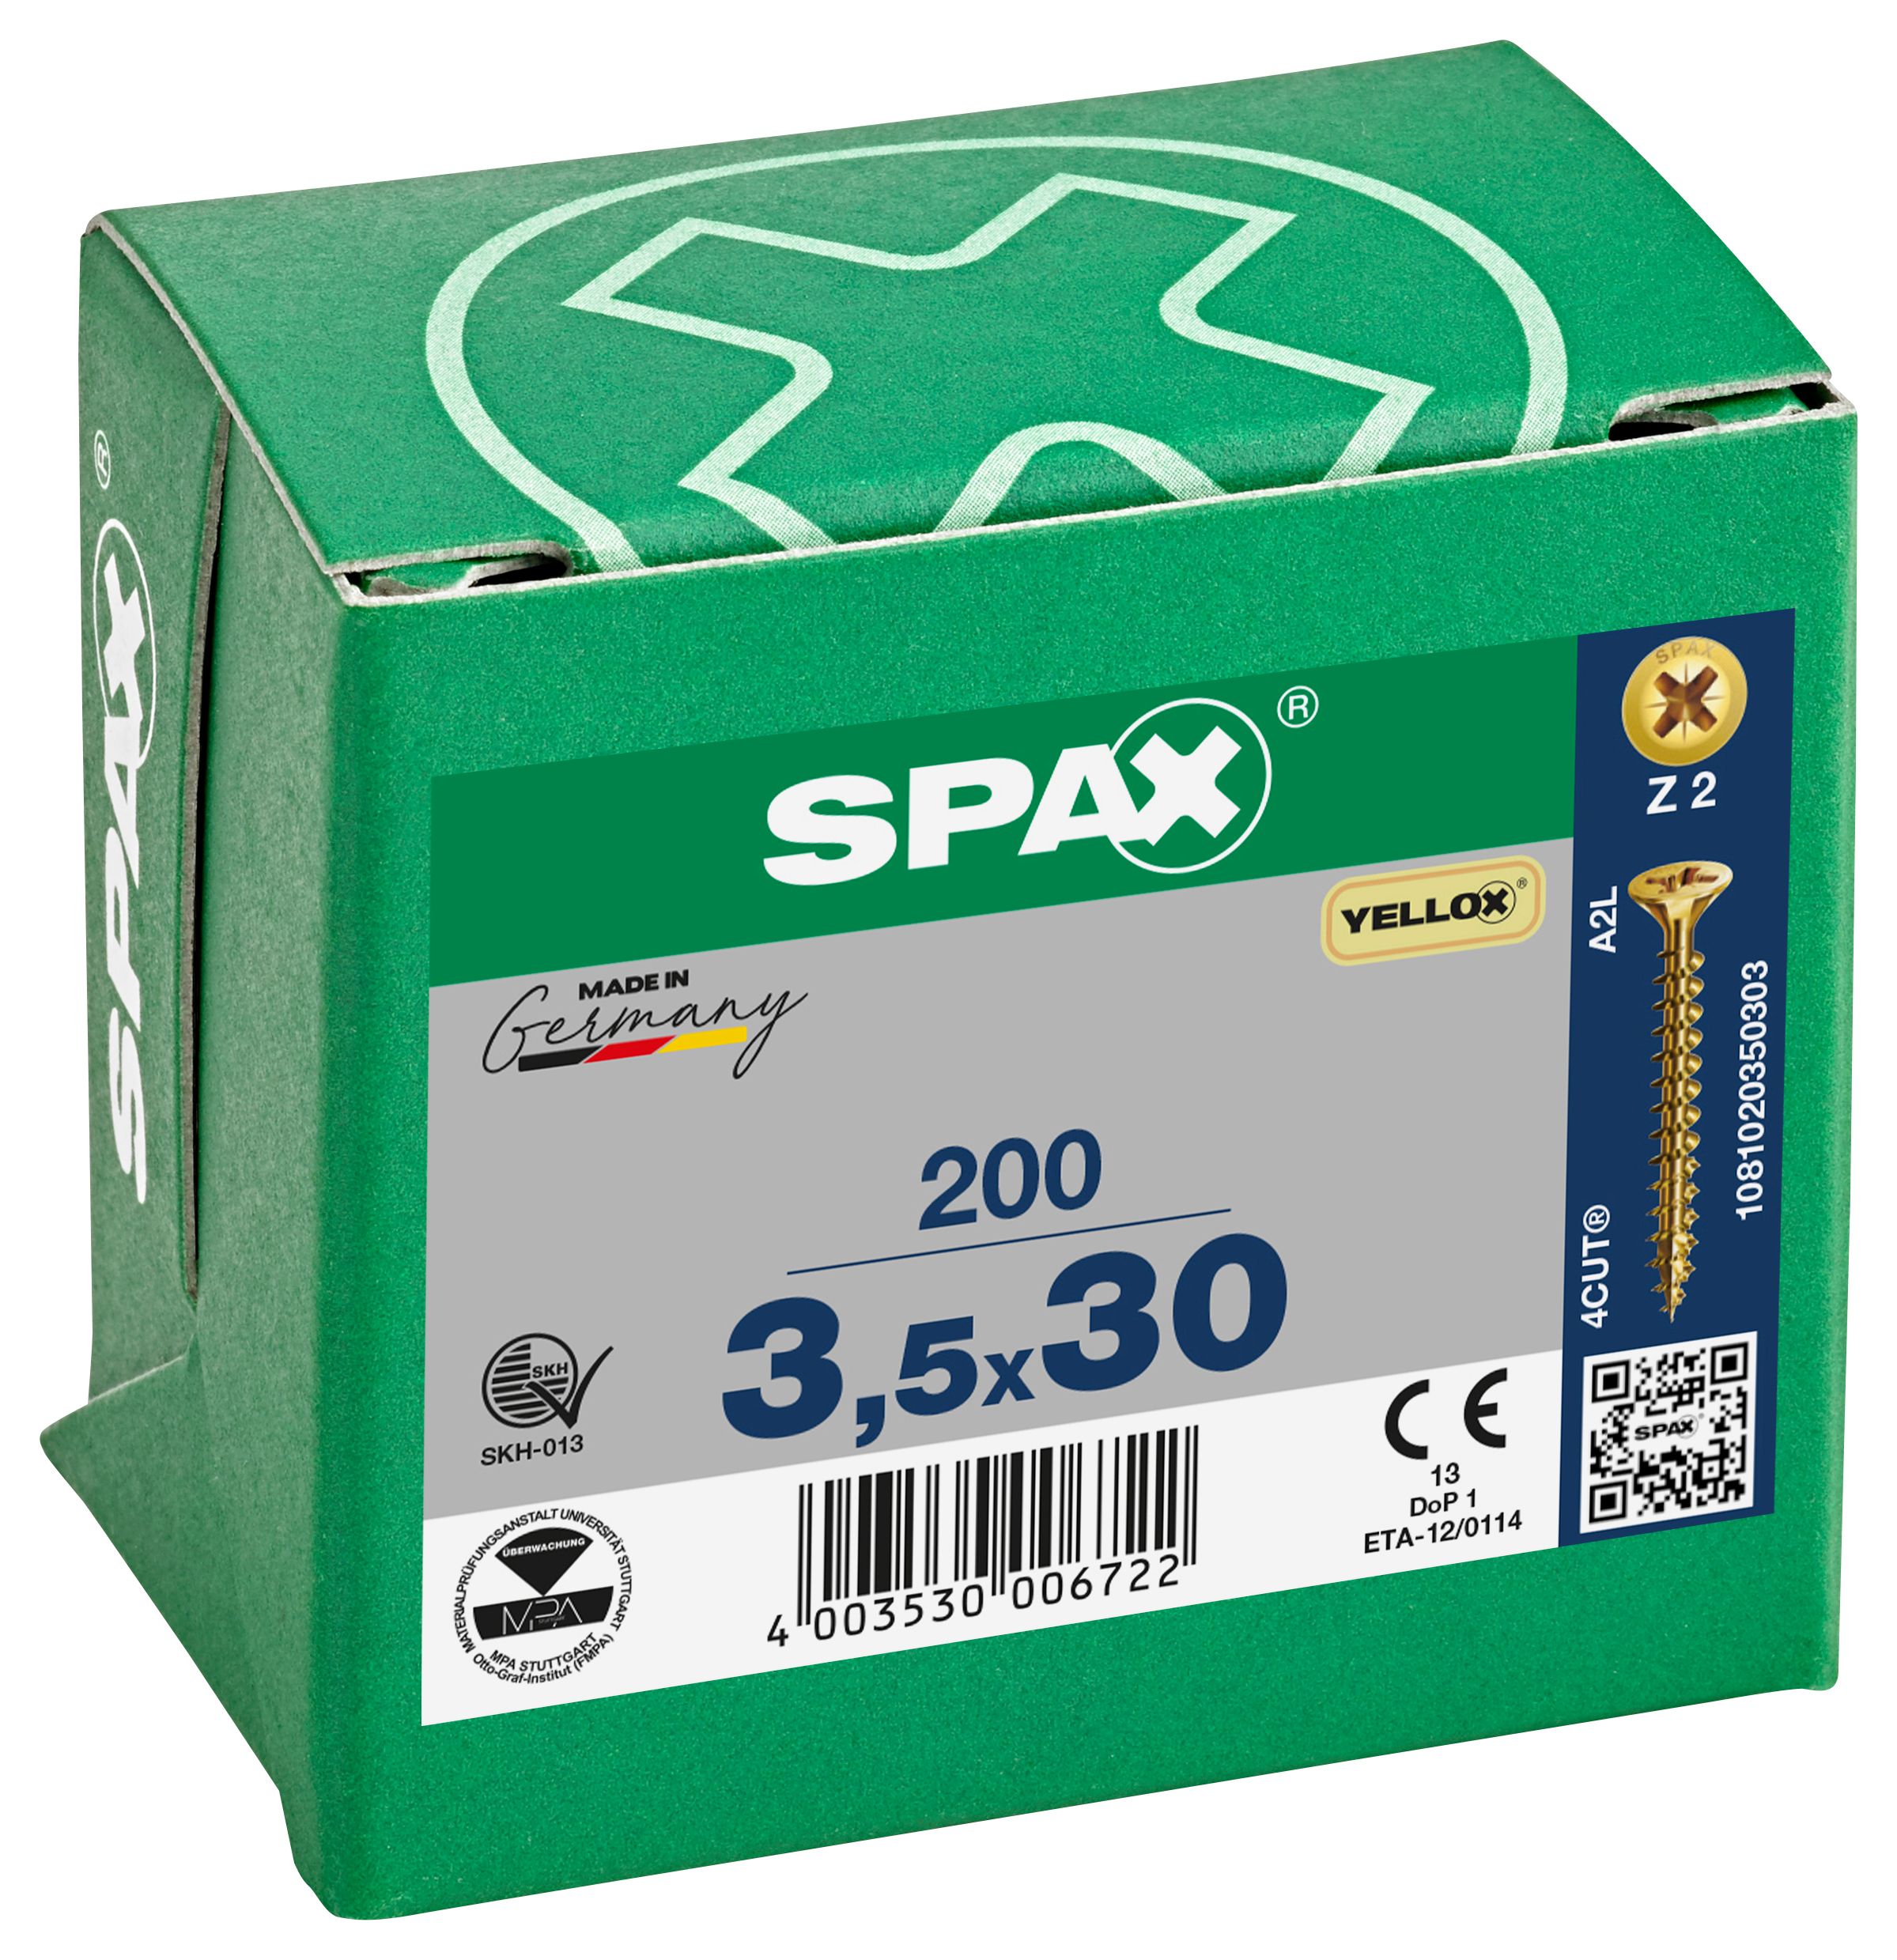 Image of Spax Pz Countersunk Yellox Screws - 3.5x30mm Pack Of 200